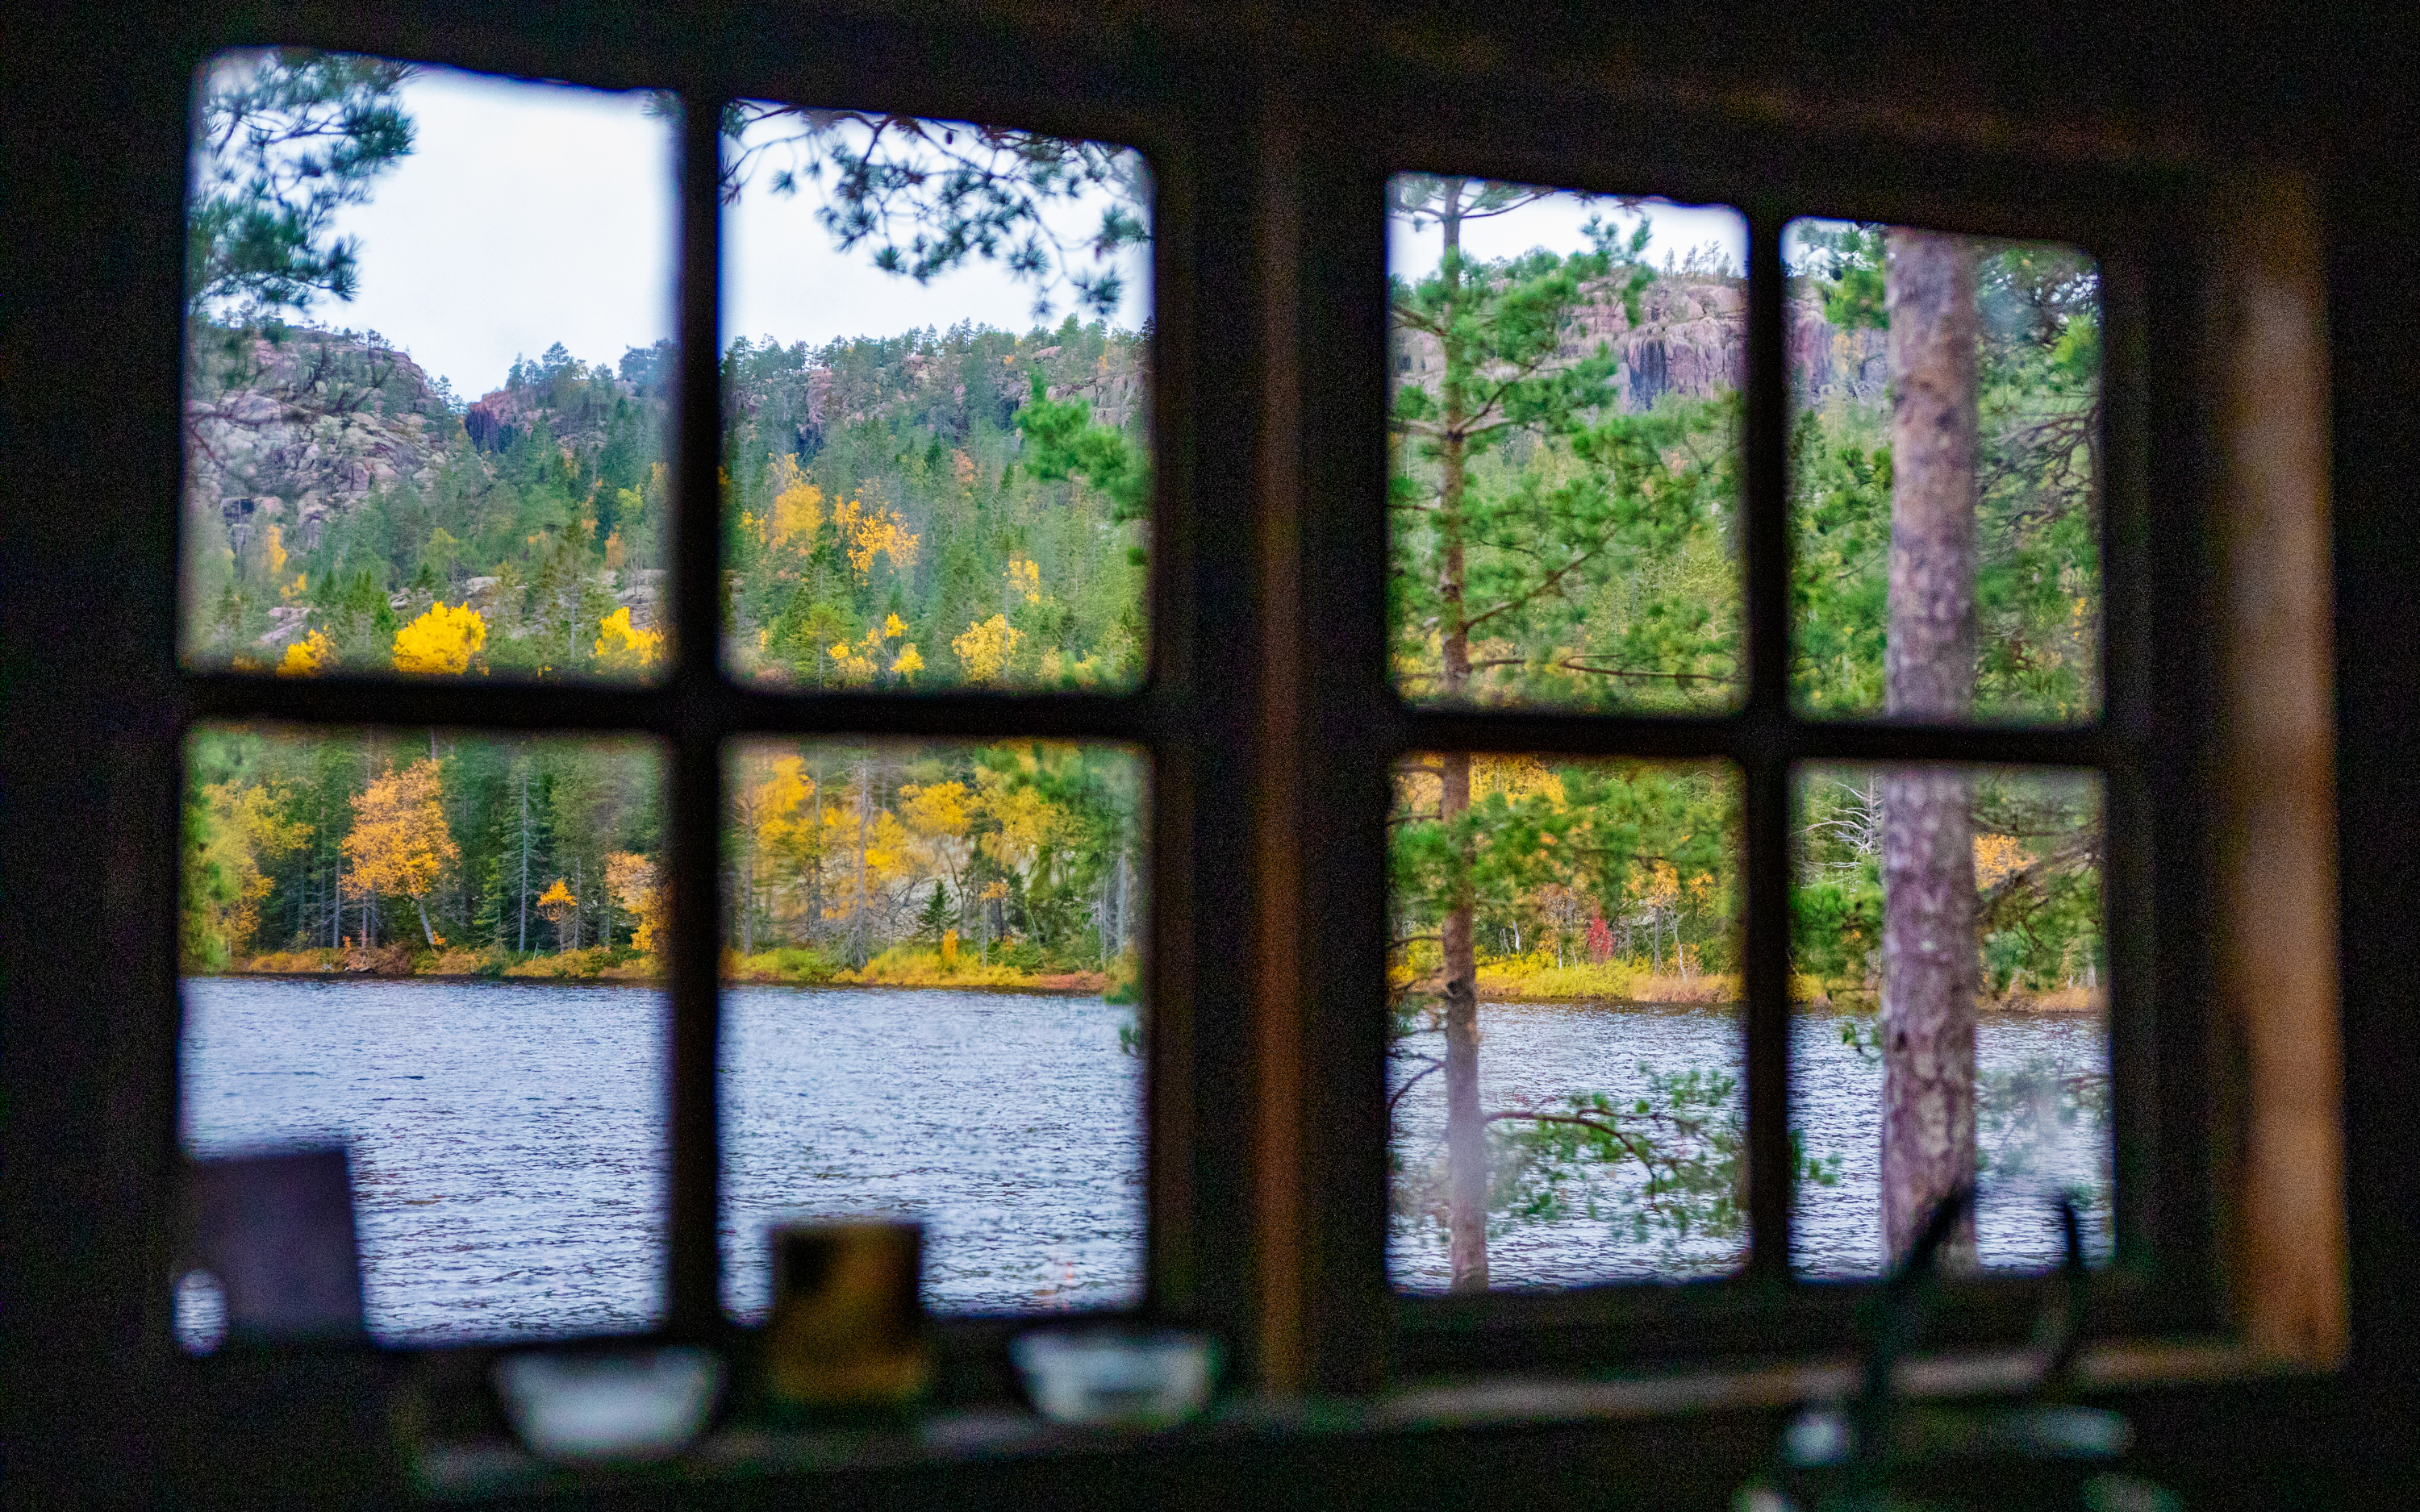 View through a window out towards a lake and a forest with autumn colors.